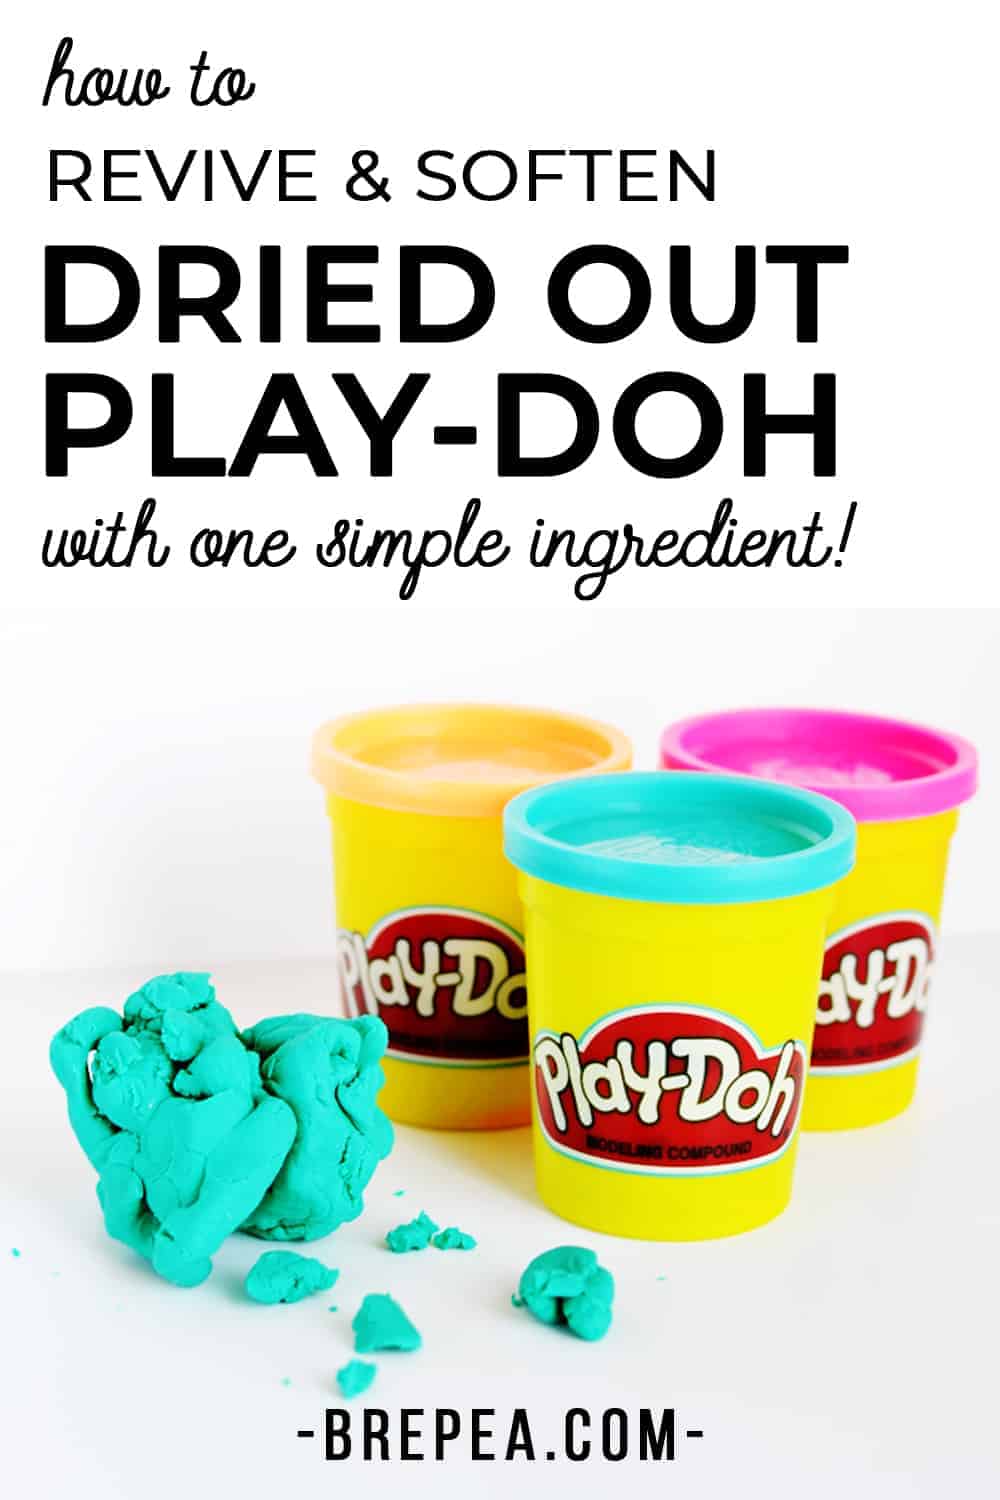 How to Fix & Revive Dried Out Play-Doh